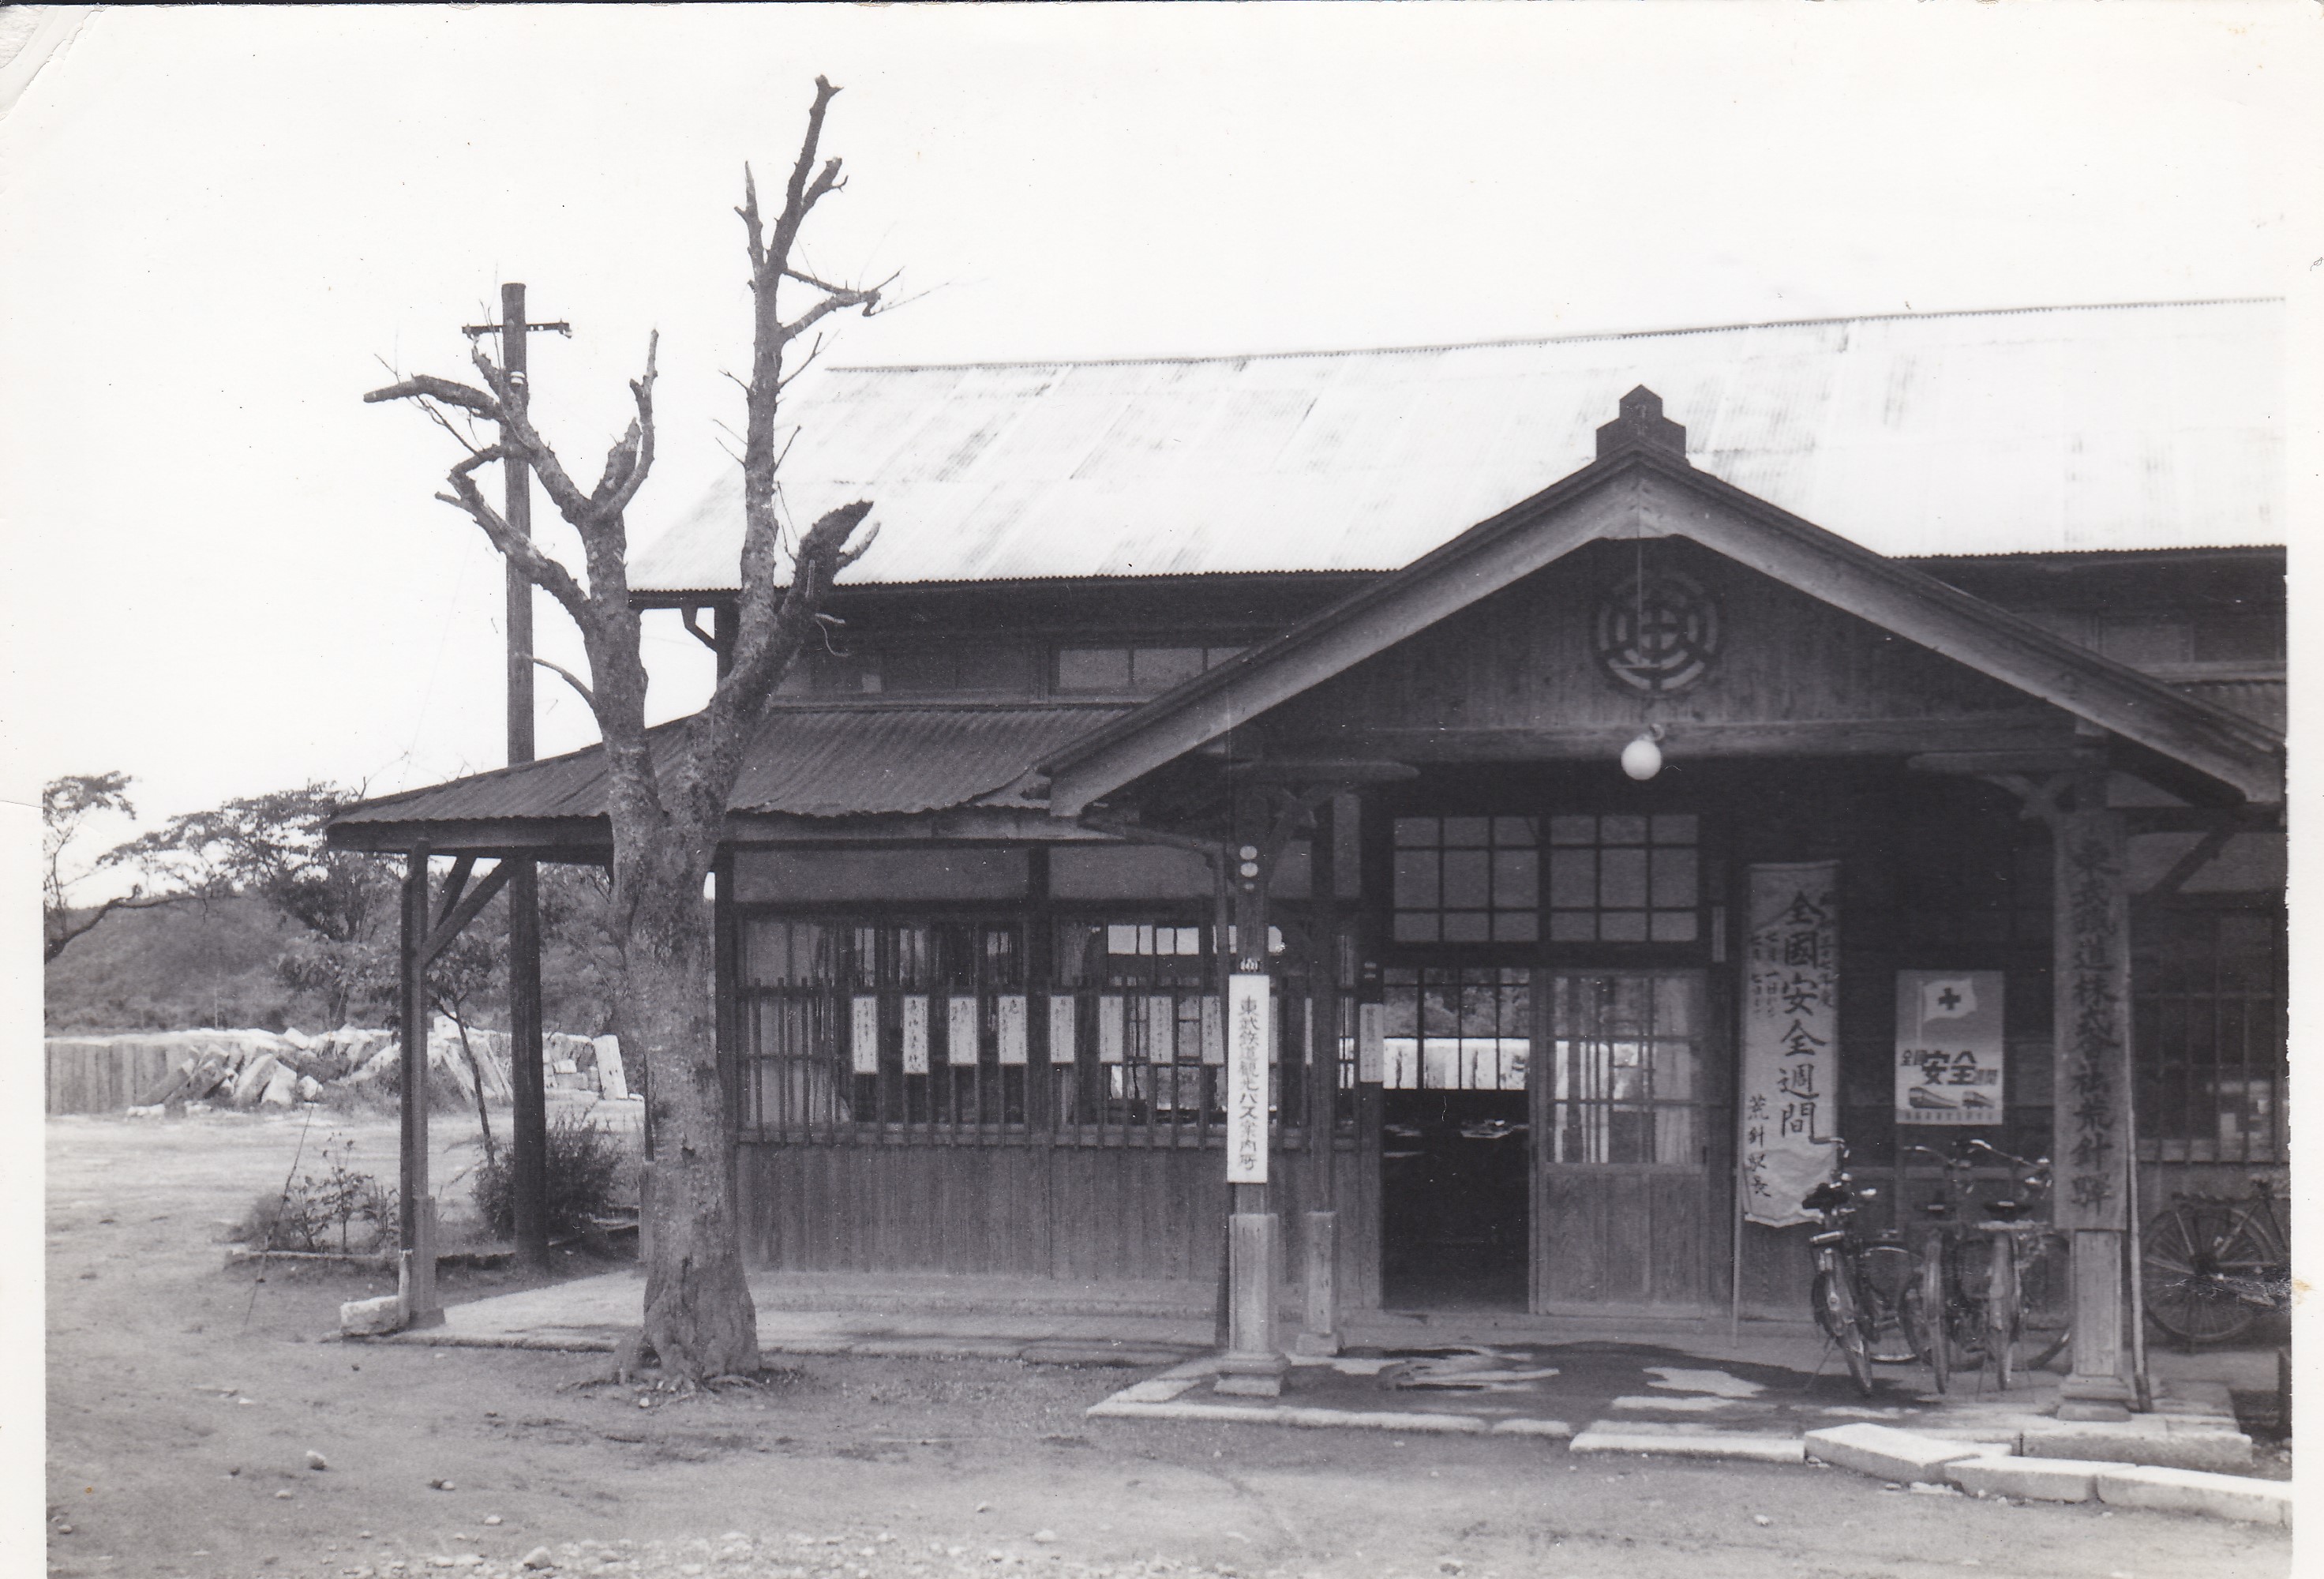 Arahari Station in the mid-1950s